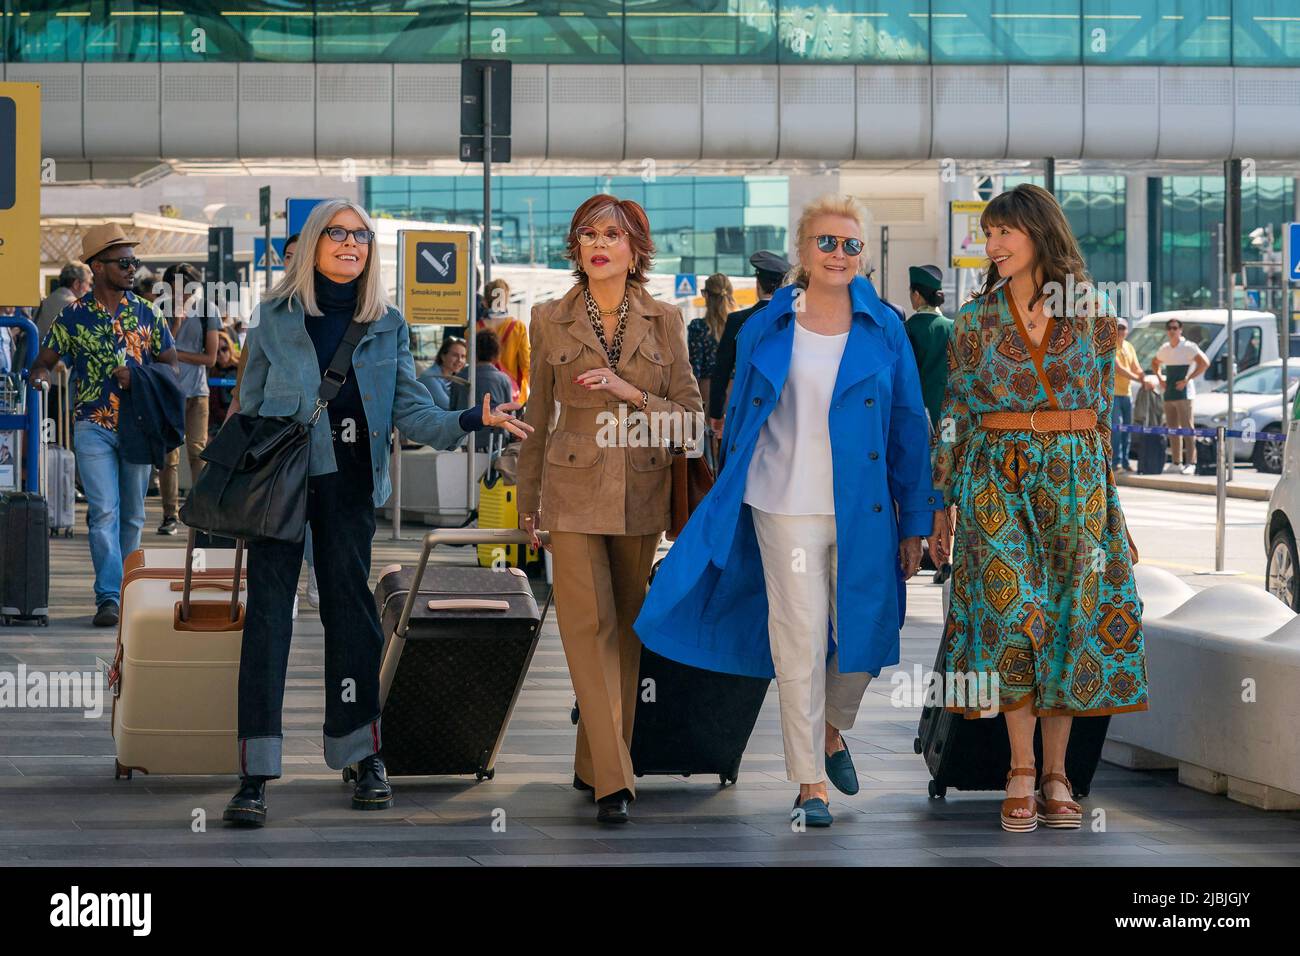 RELEASE DATE: 2022. TITLE: Book Club 2: The Next Chapter. STUDIO: Focus Features. DIRECTOR: Bill Holderman. PLOT: Follows the new journey of four best friends as they take their book club to Italy for the fun girls trip they never had.. STARRING: (l-r) DIANE KEATON as Diane, JANE FONDA as Vivian, CANDICE BERGEN as Sharon, MARY STEENBURGEN as Carol. (Credit Image: © Focus Features/Entertainment Pictures) Stock Photo